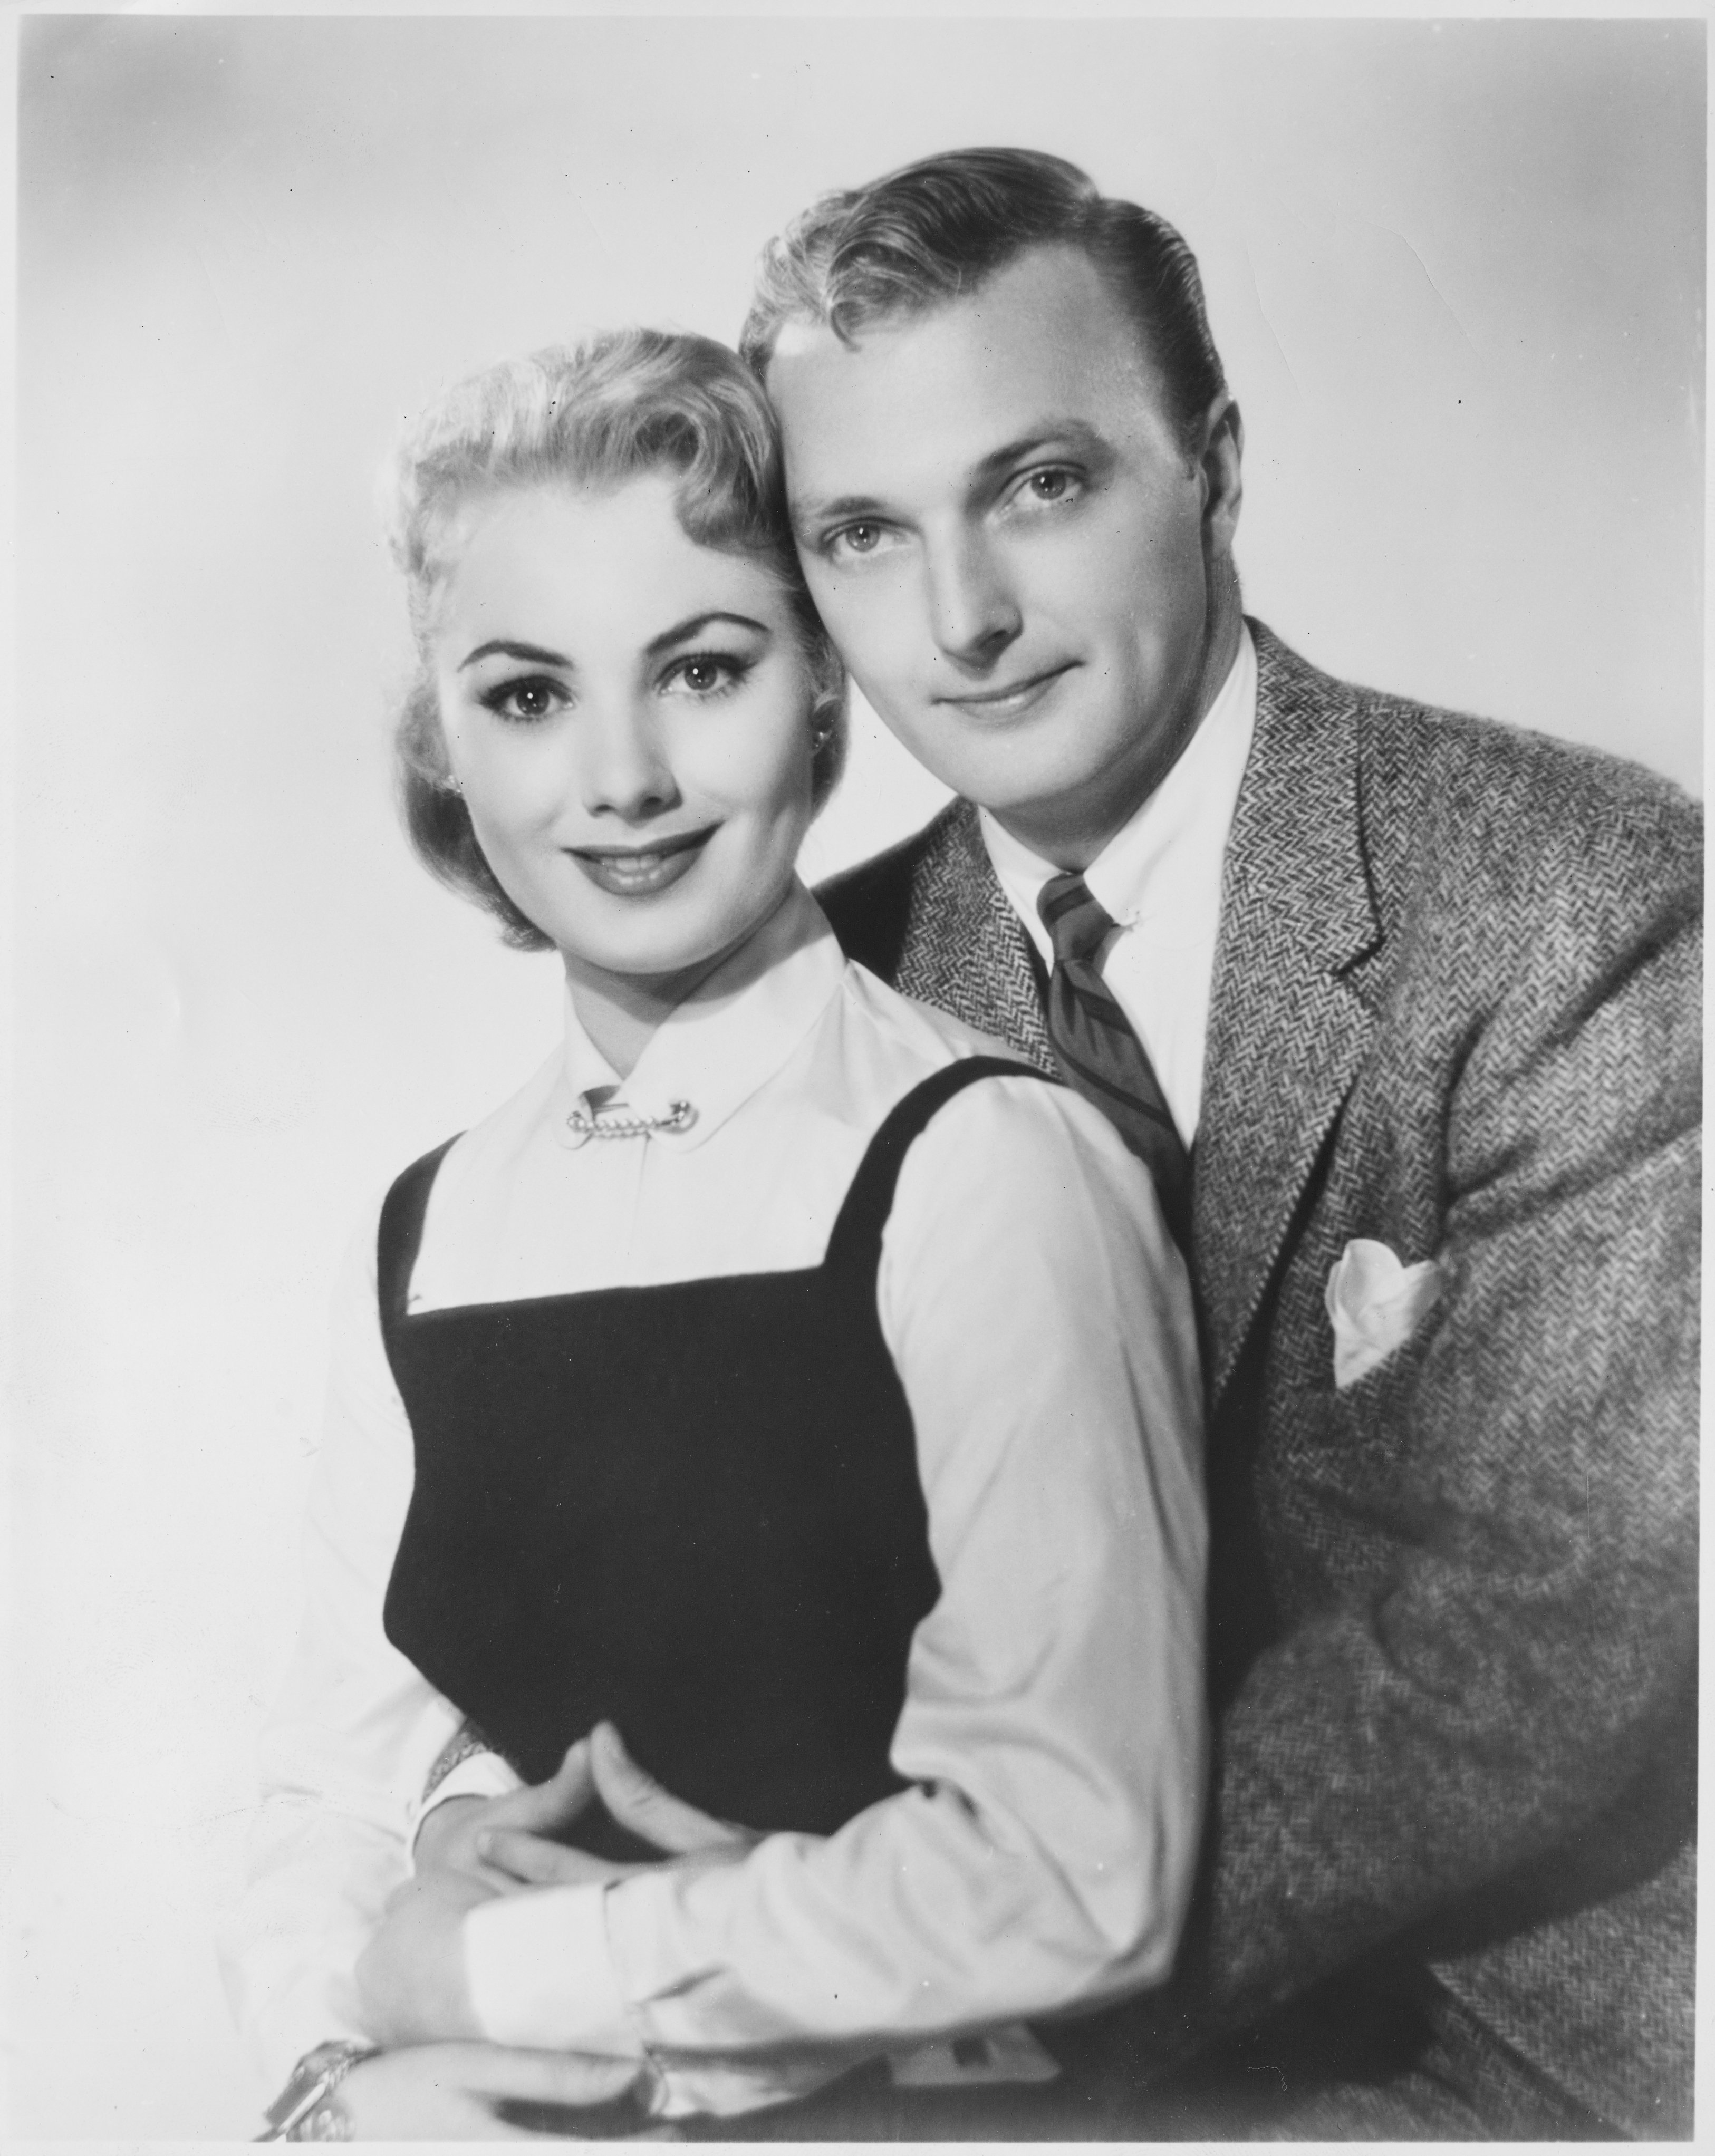 Shirley Jones and Jack Cassidy posing in a black and white photo, circa 1950. | Source: John Springer Collection/Corbis/Getty Images